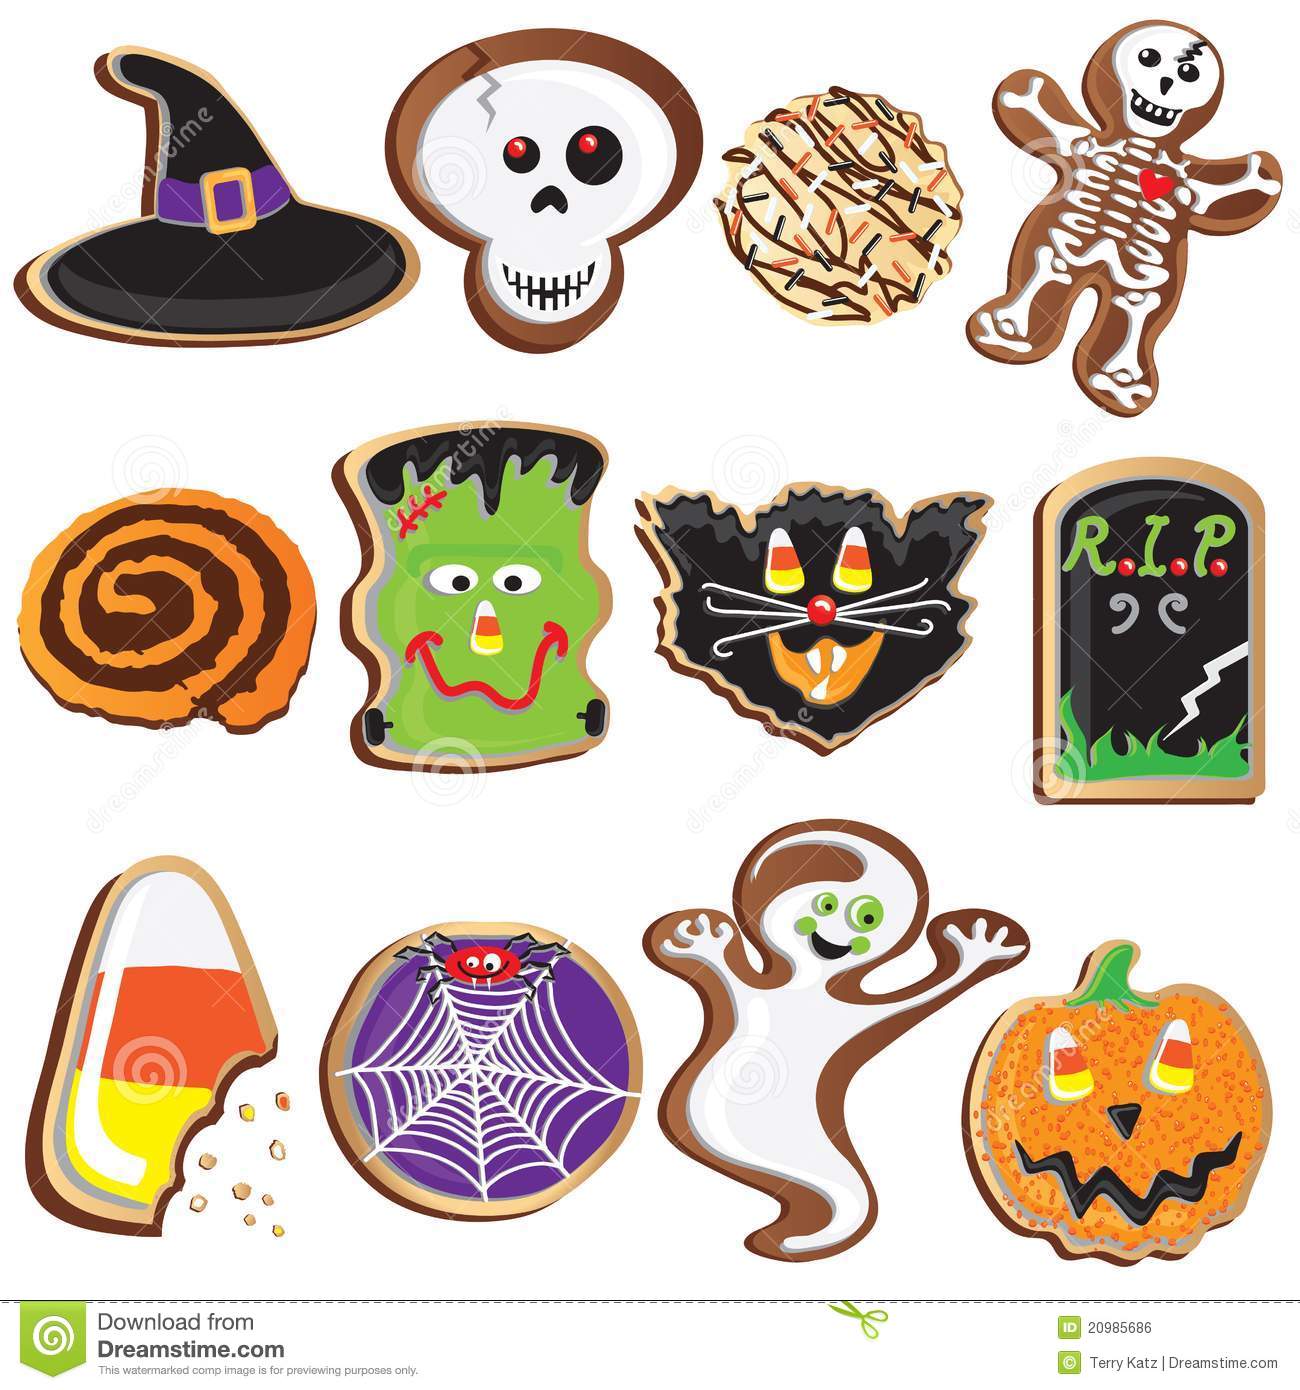 Cute Halloween Cookies Clipart Royalty Free Stock Image   Image